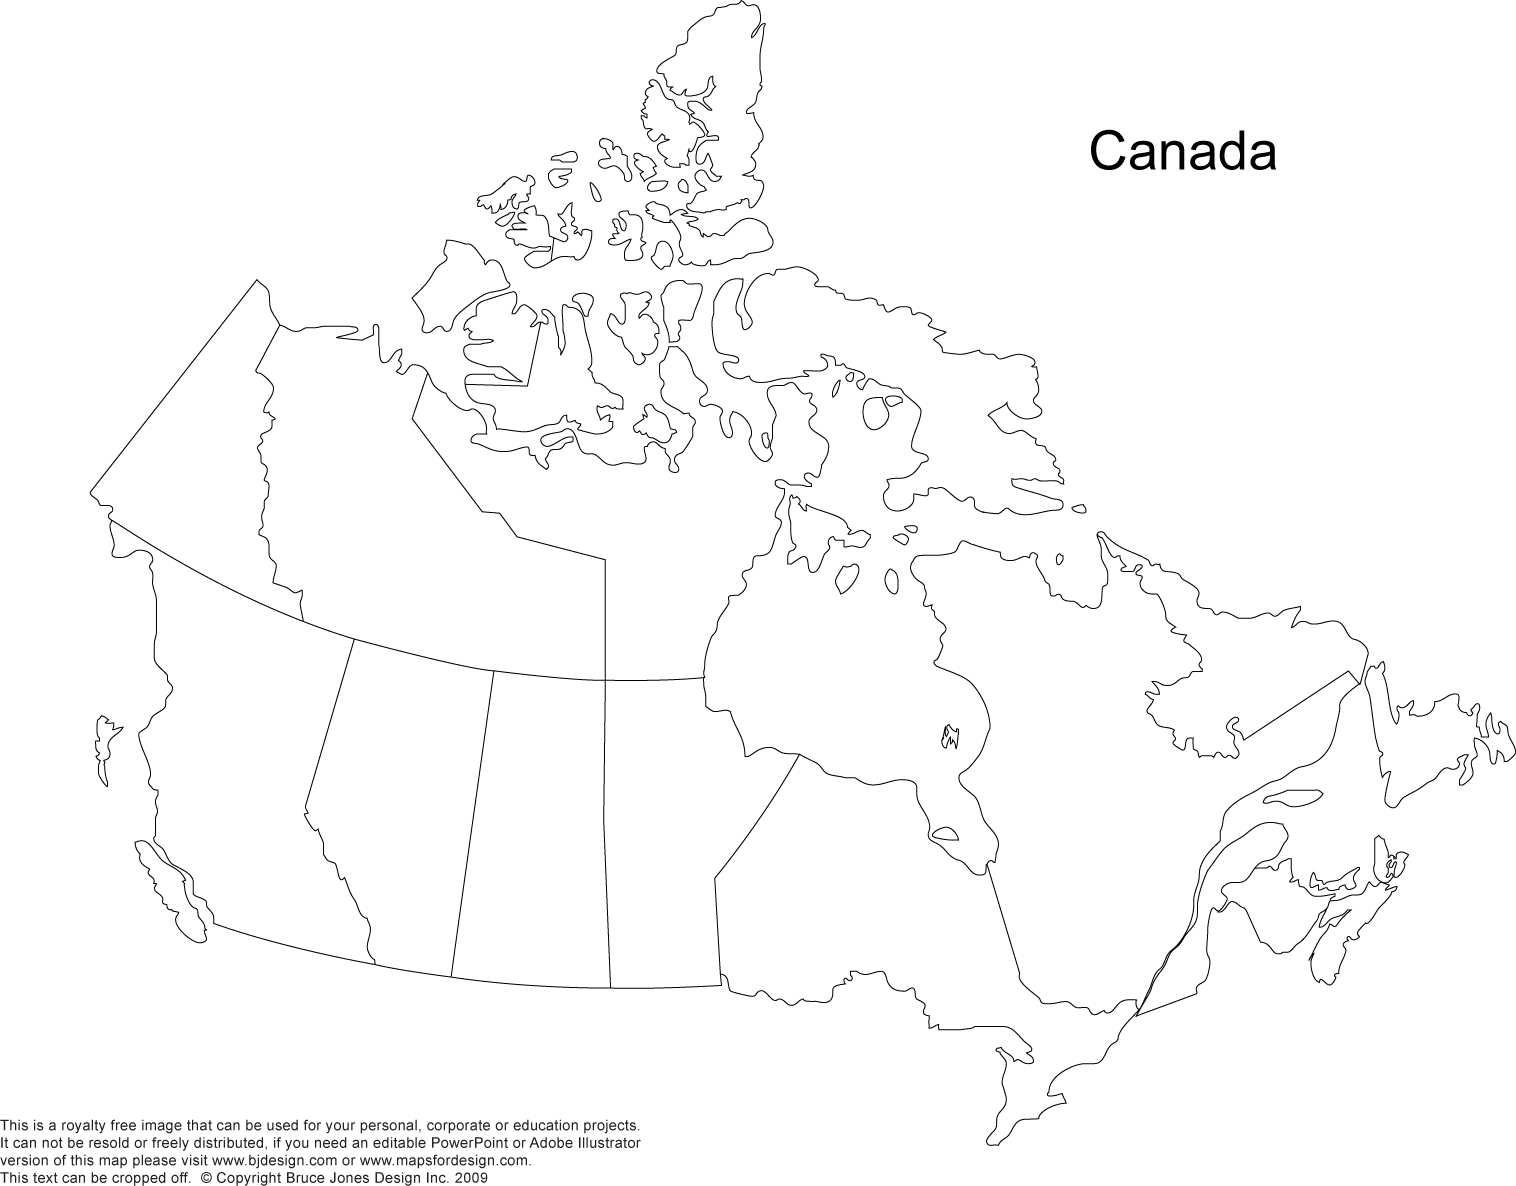 7 Best Images of Printable Outline Maps Of Canada - Blank Canada Map ...